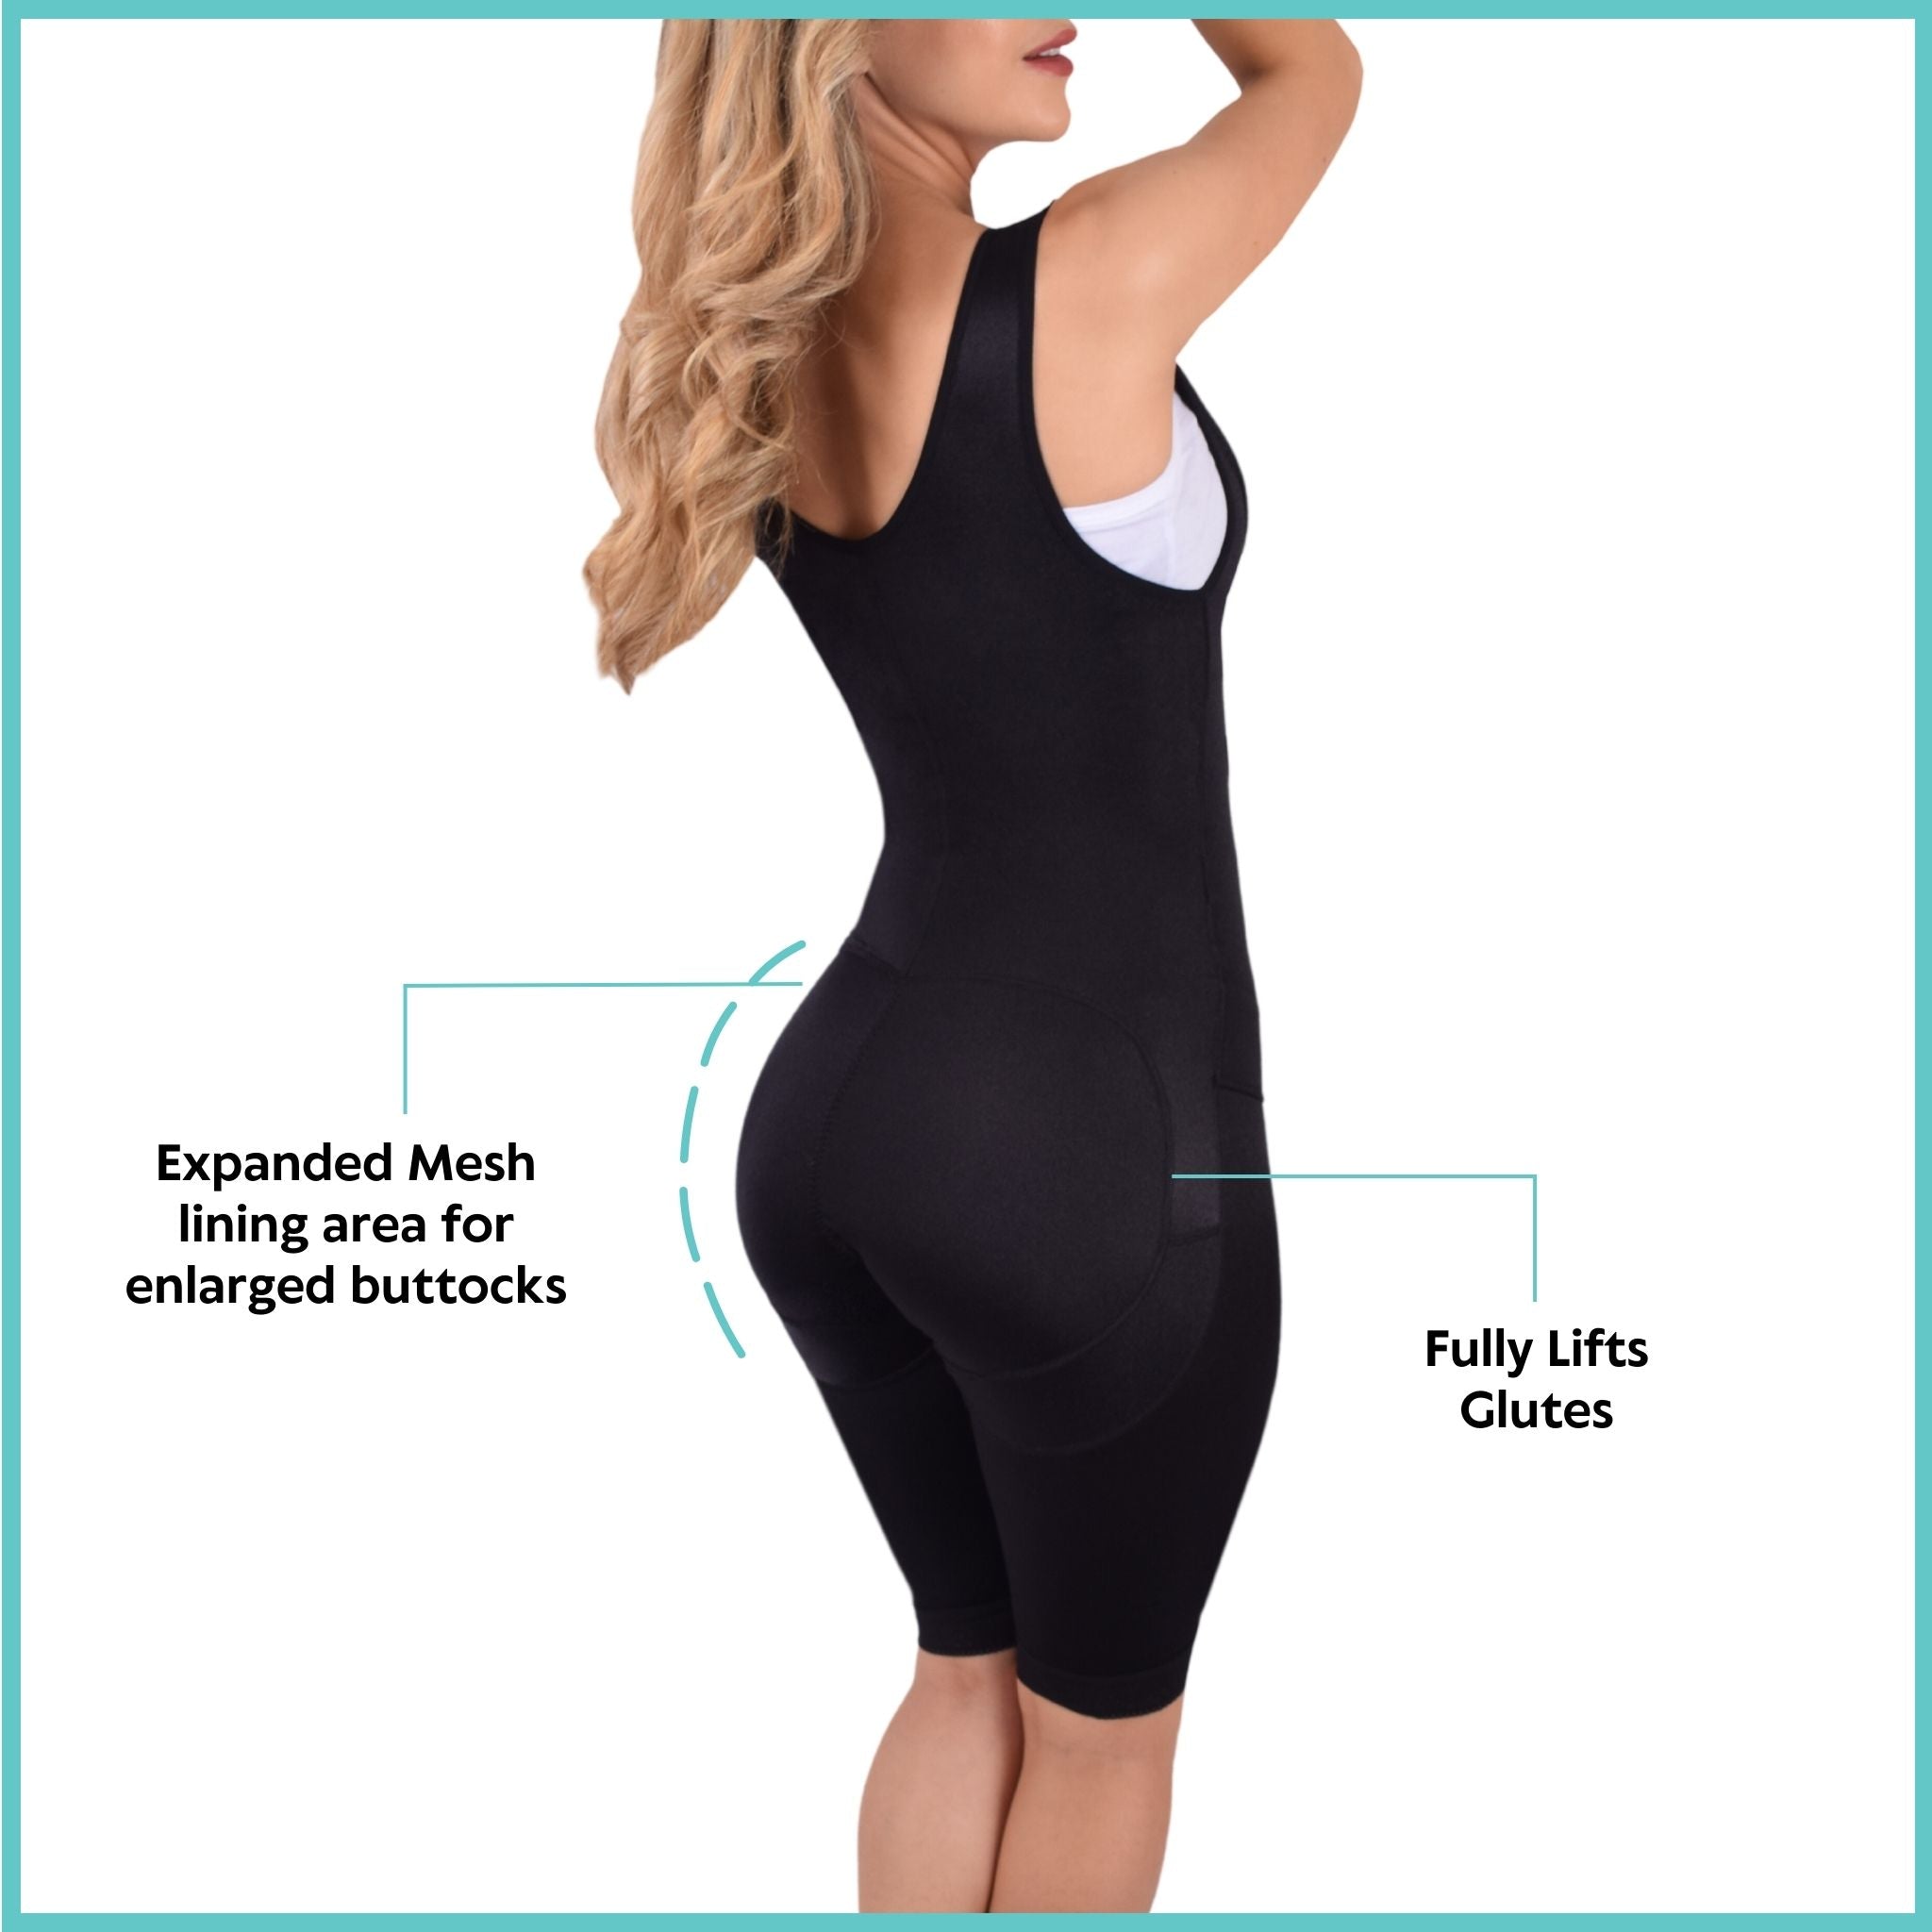 Faja Stages After a Tummy Tuck: Comprehensive Guide